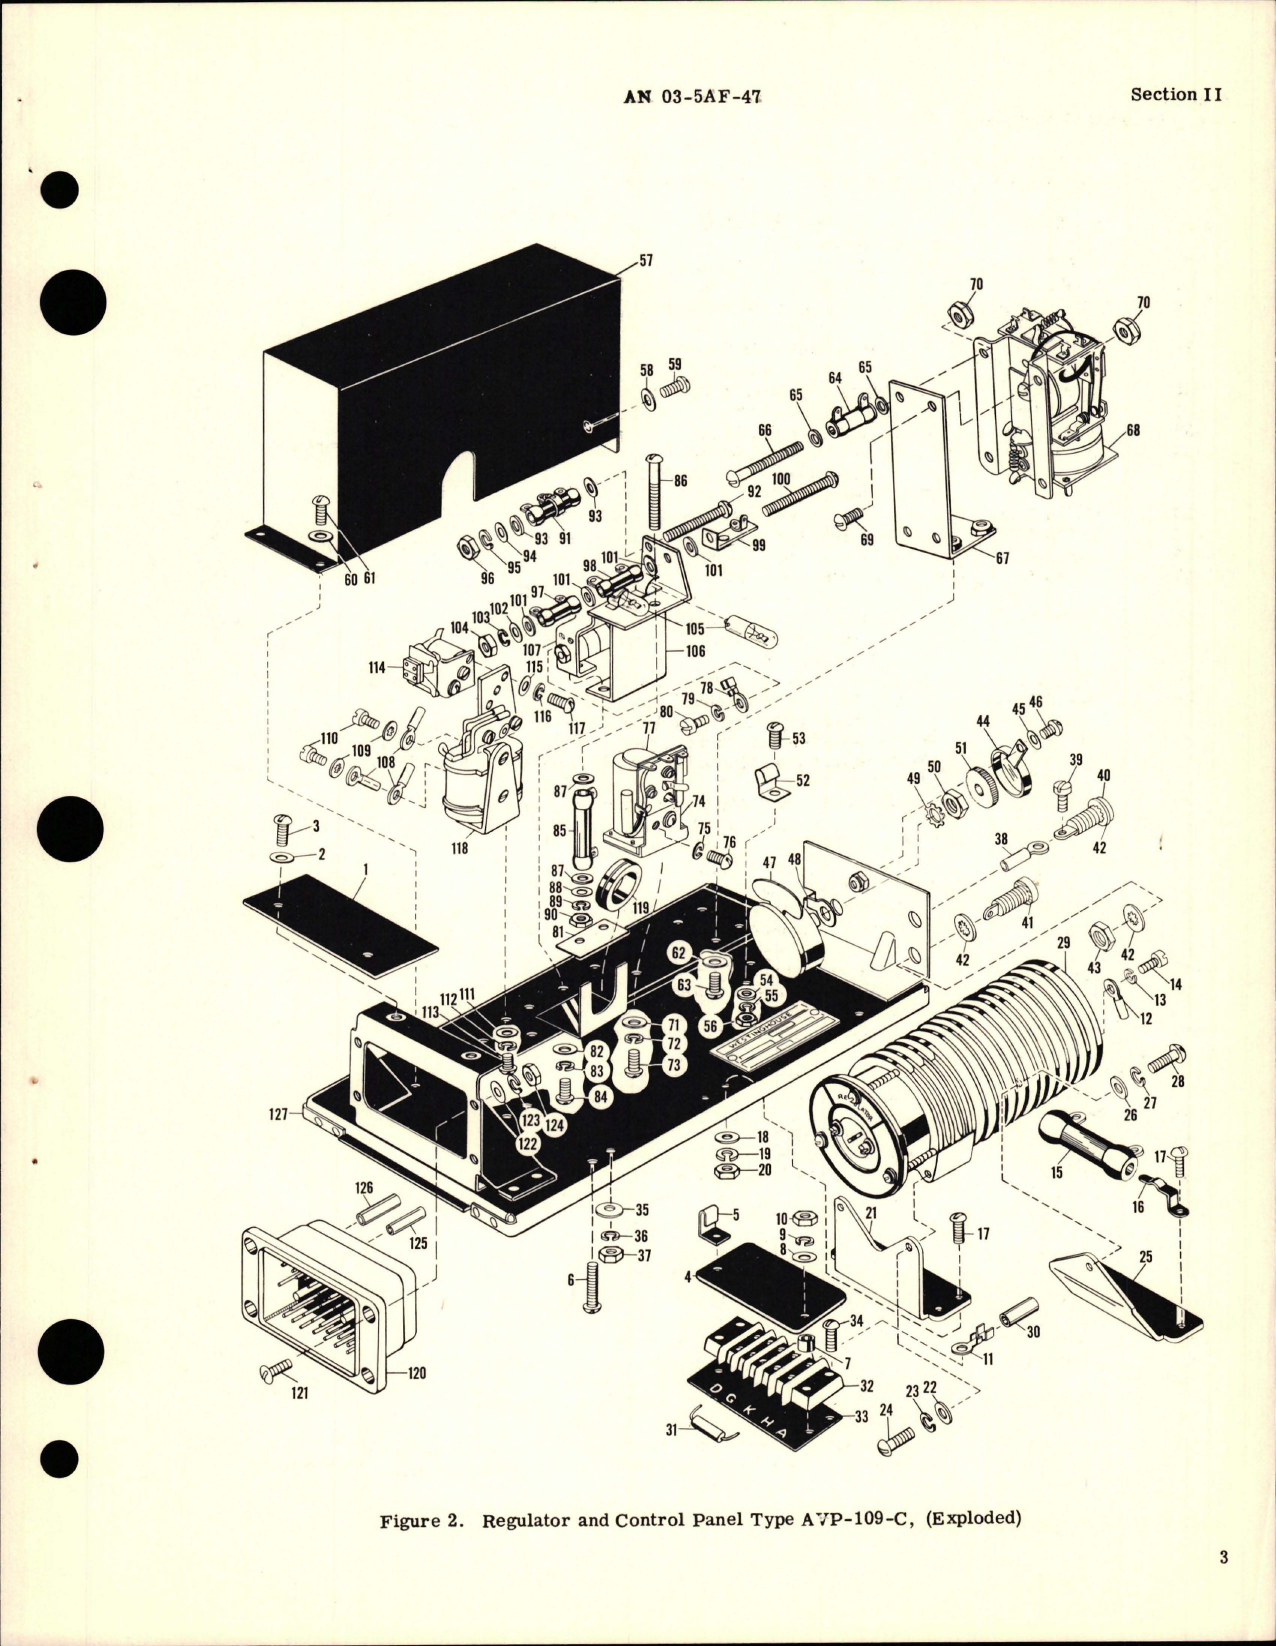 Sample page 5 from AirCorps Library document: Parts Catalog for Regulator & Control Panel - Parts A 24A9178-3 - Type AVP-109-C 